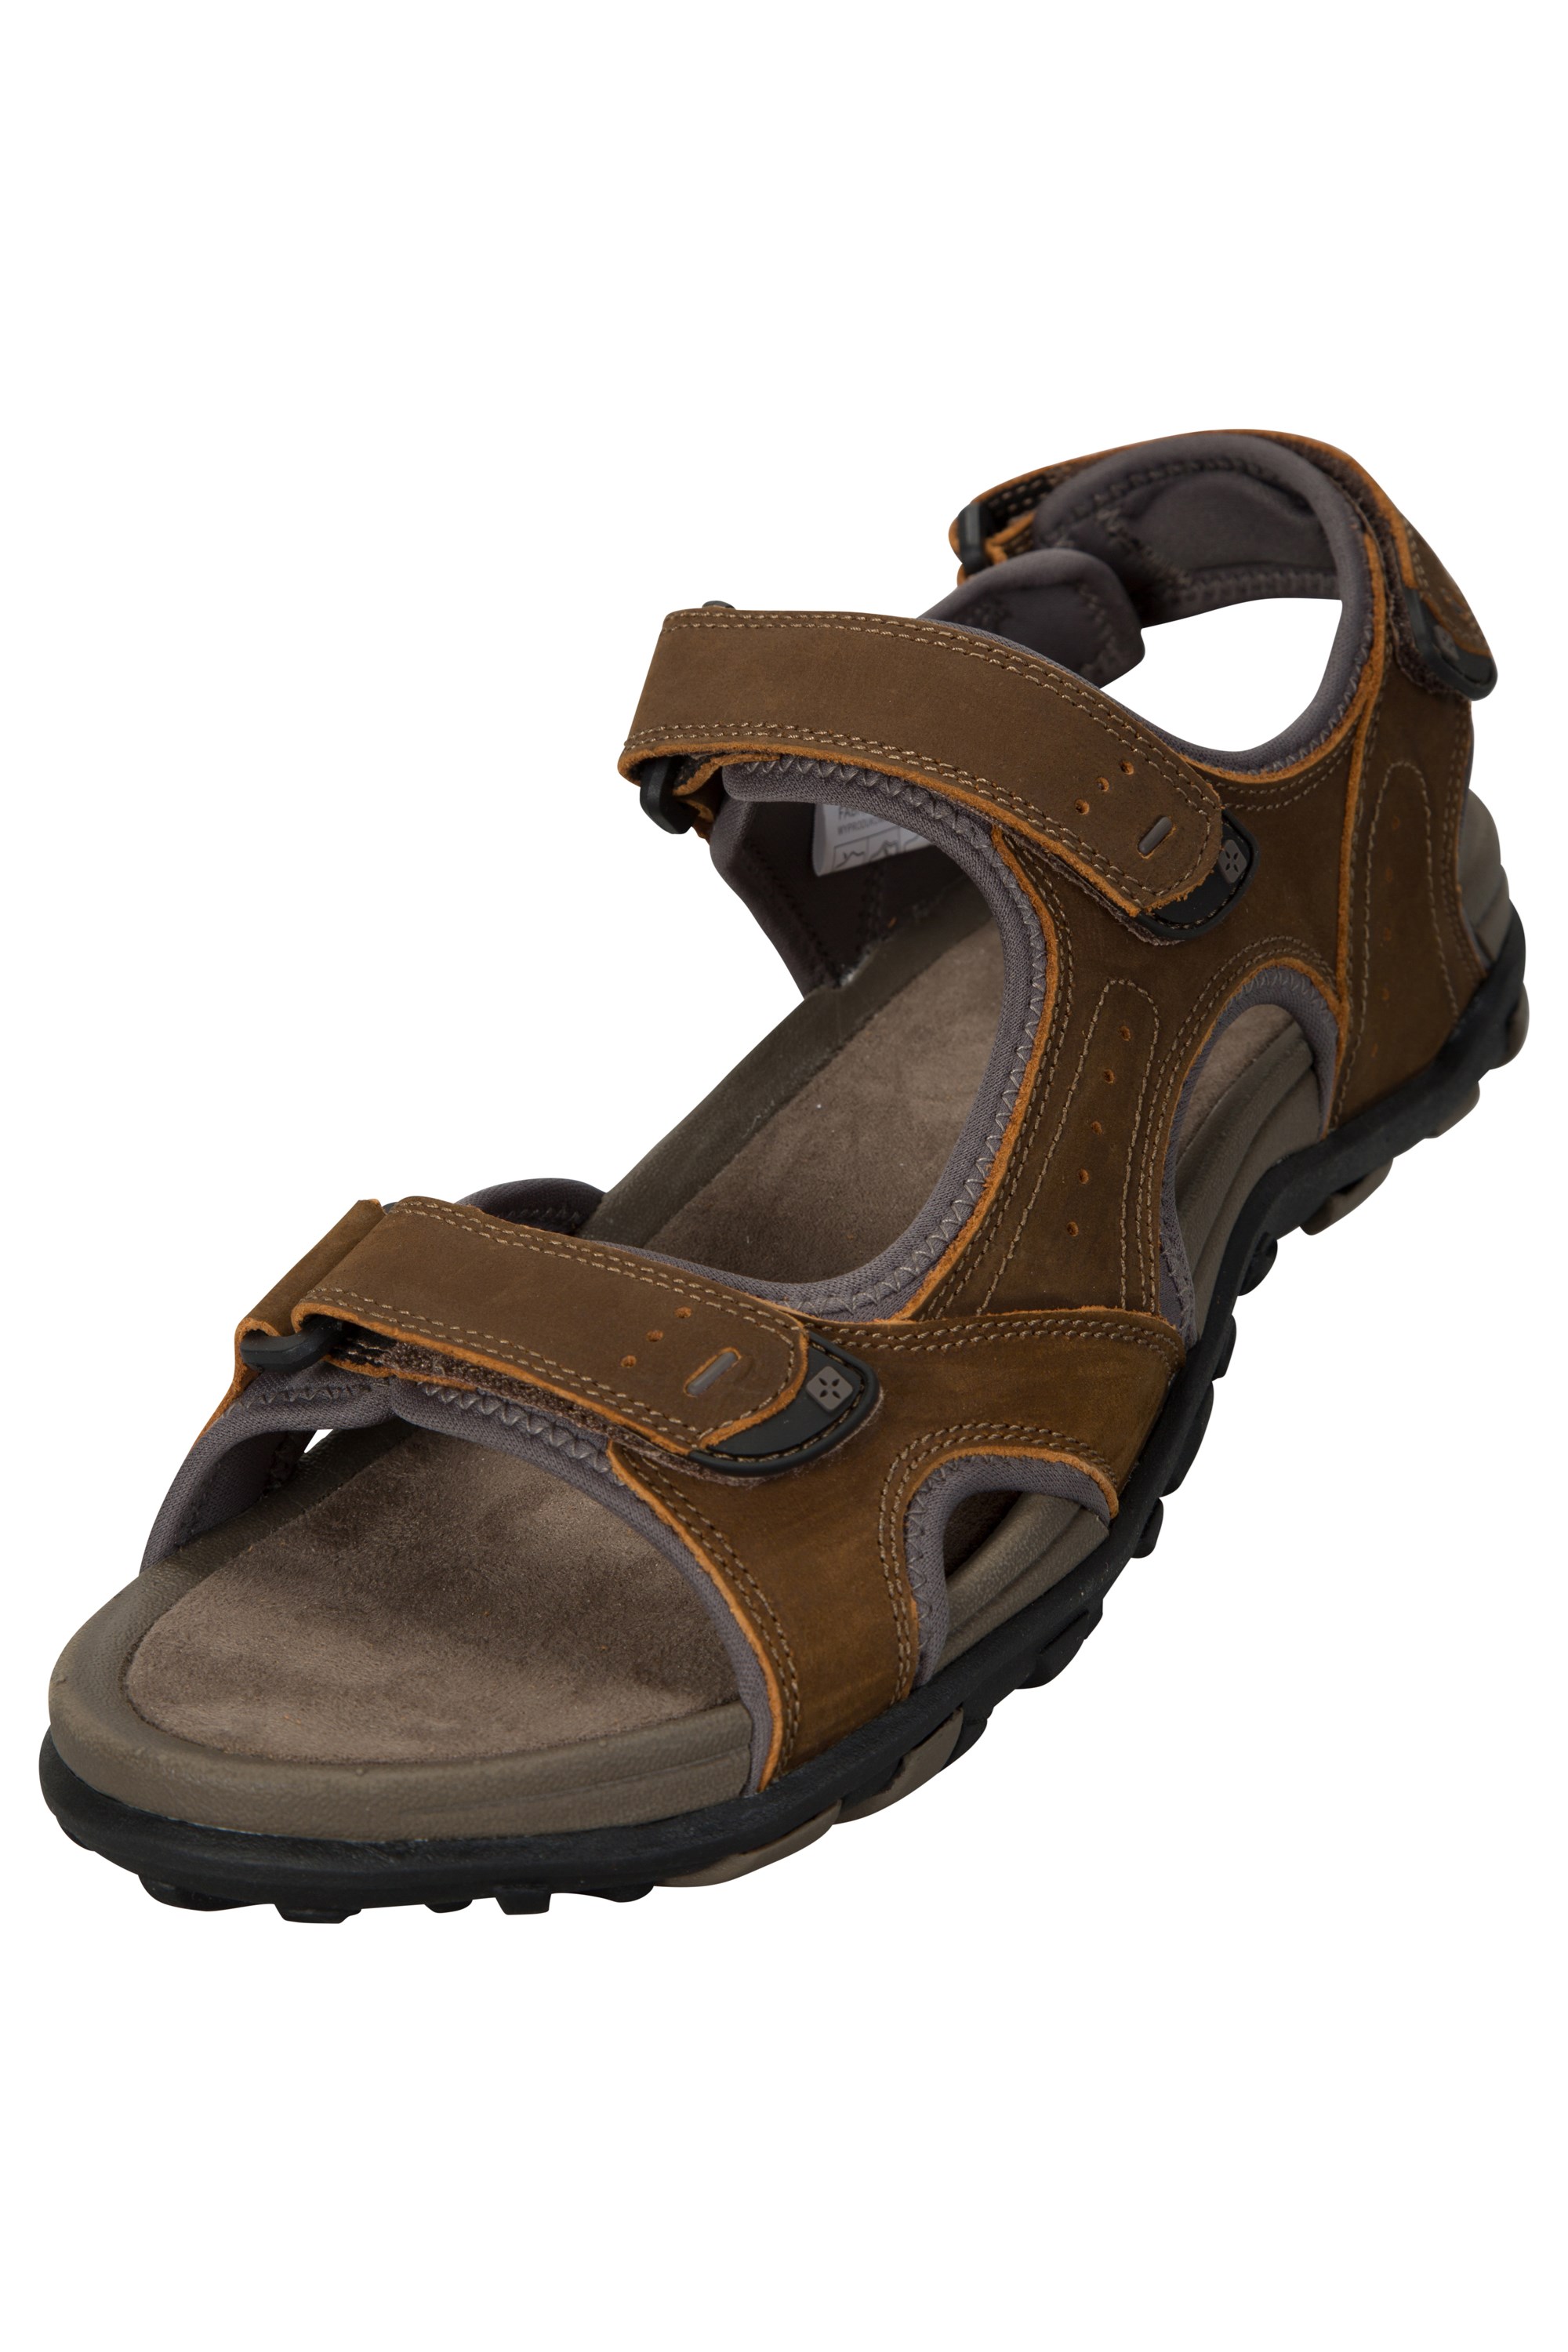 Sanuk Men's Hullsome Leather Soft Top Sandals - High Mountain Sports